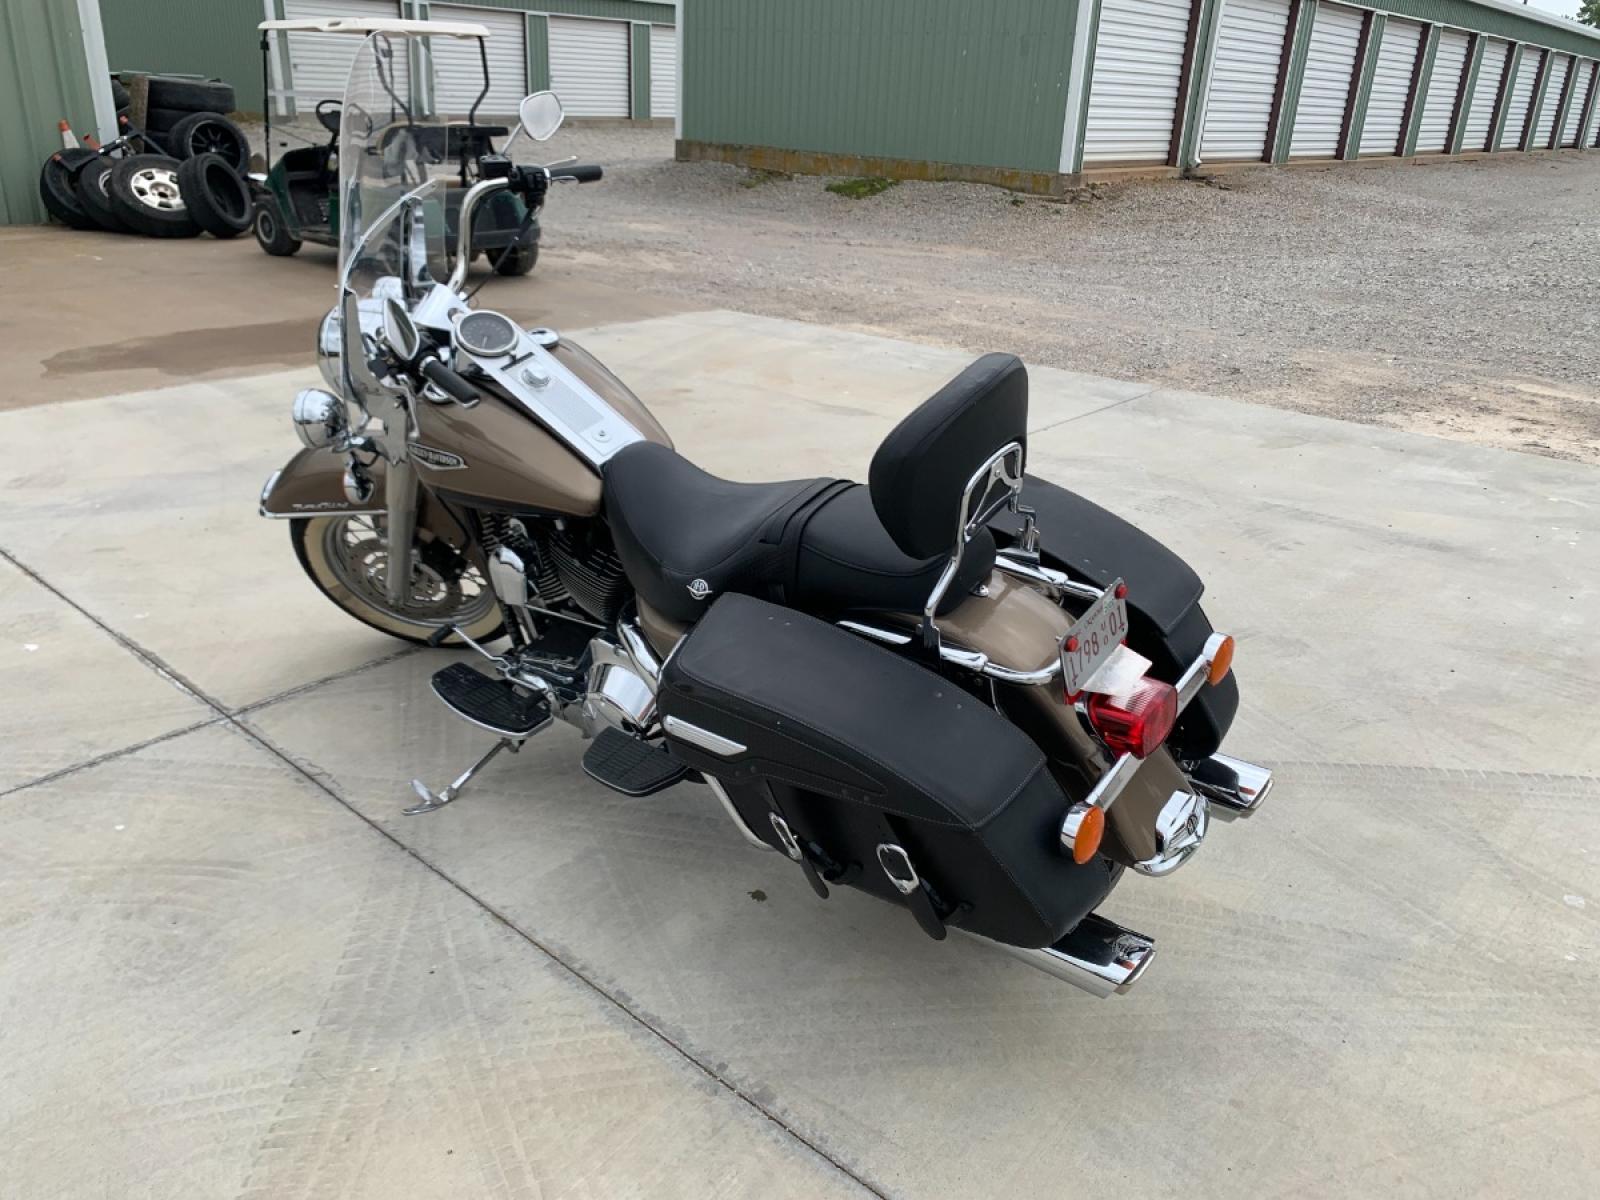 2004 GOLD Harley-Davidson FLHRCI ROAD KING (1HD1FRW104Y) with an 1450CC engine, 5 SPEED MANUAL transmission, located at 17760 HWY 62, MORRIS, 74445, 35.609104, -95.877060 - 2004 HARLEY DAVIDSON FLHRCI ROAD KING IS READY TO CRUISE THE HIGHWAYS. IT HAS A V2 FOUR-STROKE MOTOR, 1450CC, FEATURES LEATHER SEATS, ELECTRIC START, CRUISE CONTROL, 5-SPEED MANUAL, VANCE AND HINES DUAL EXHAUST, AND LEATHER-COVERED COMPOSITE SADDLEBAGS. IT APPEARS TO BE GARAGE KEPT. REBUILT TITLE D - Photo #6